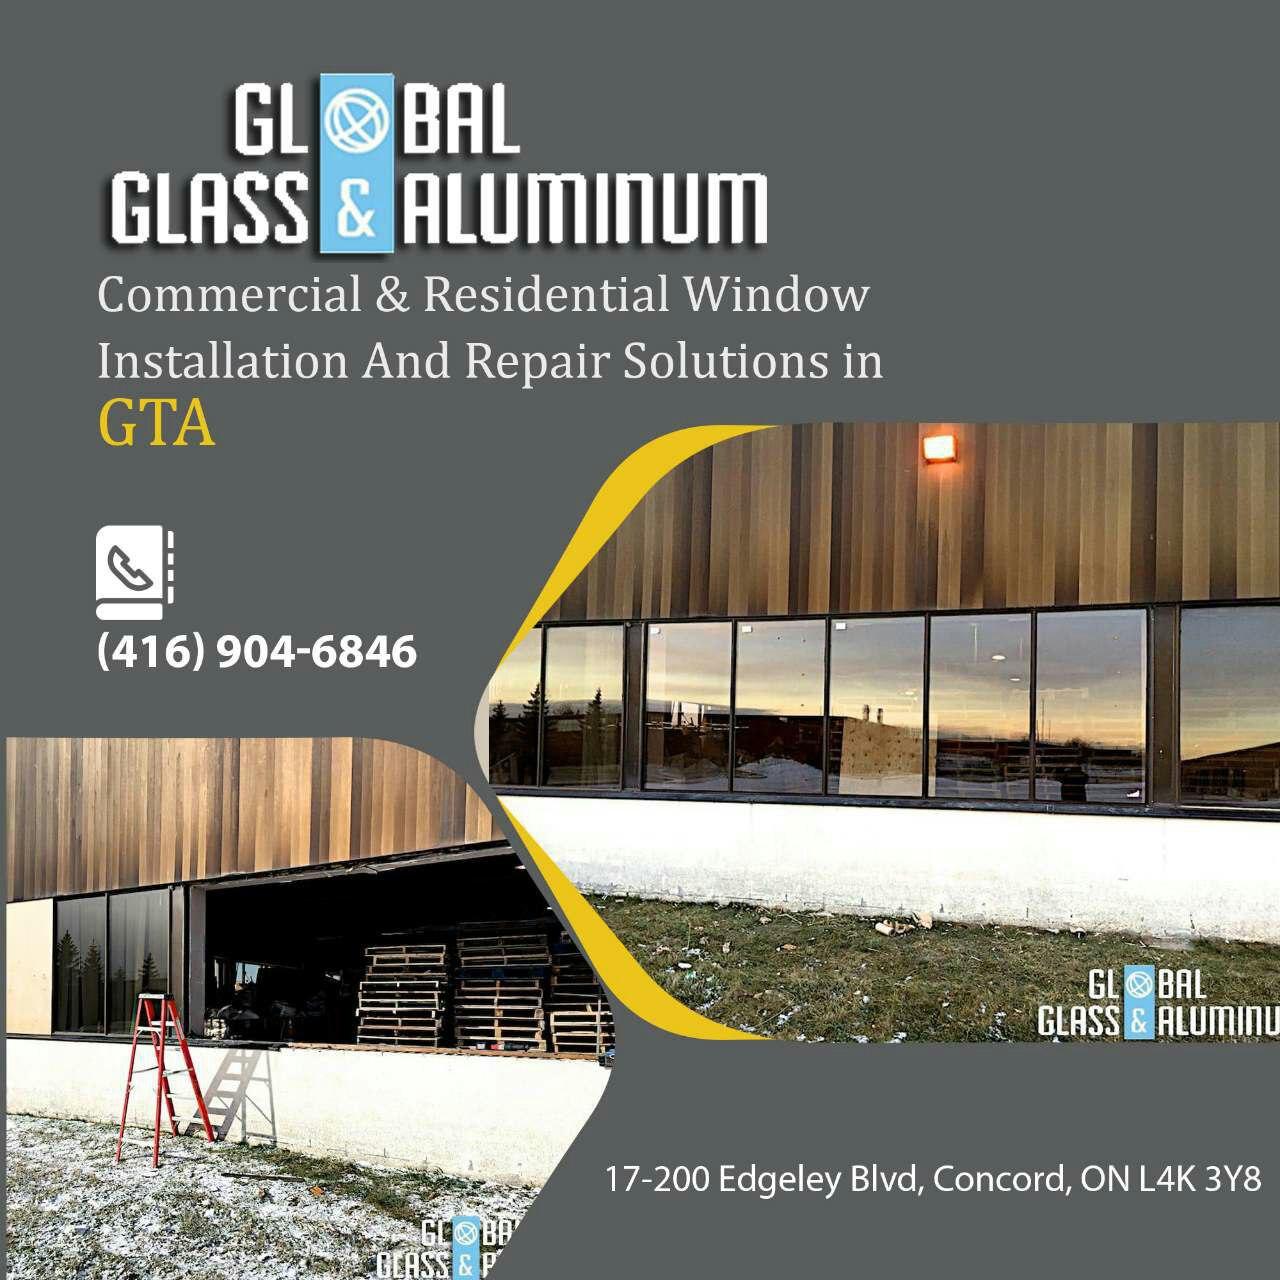 Removal and disposal, supply and board up the windows of a warehouse in Mississauga